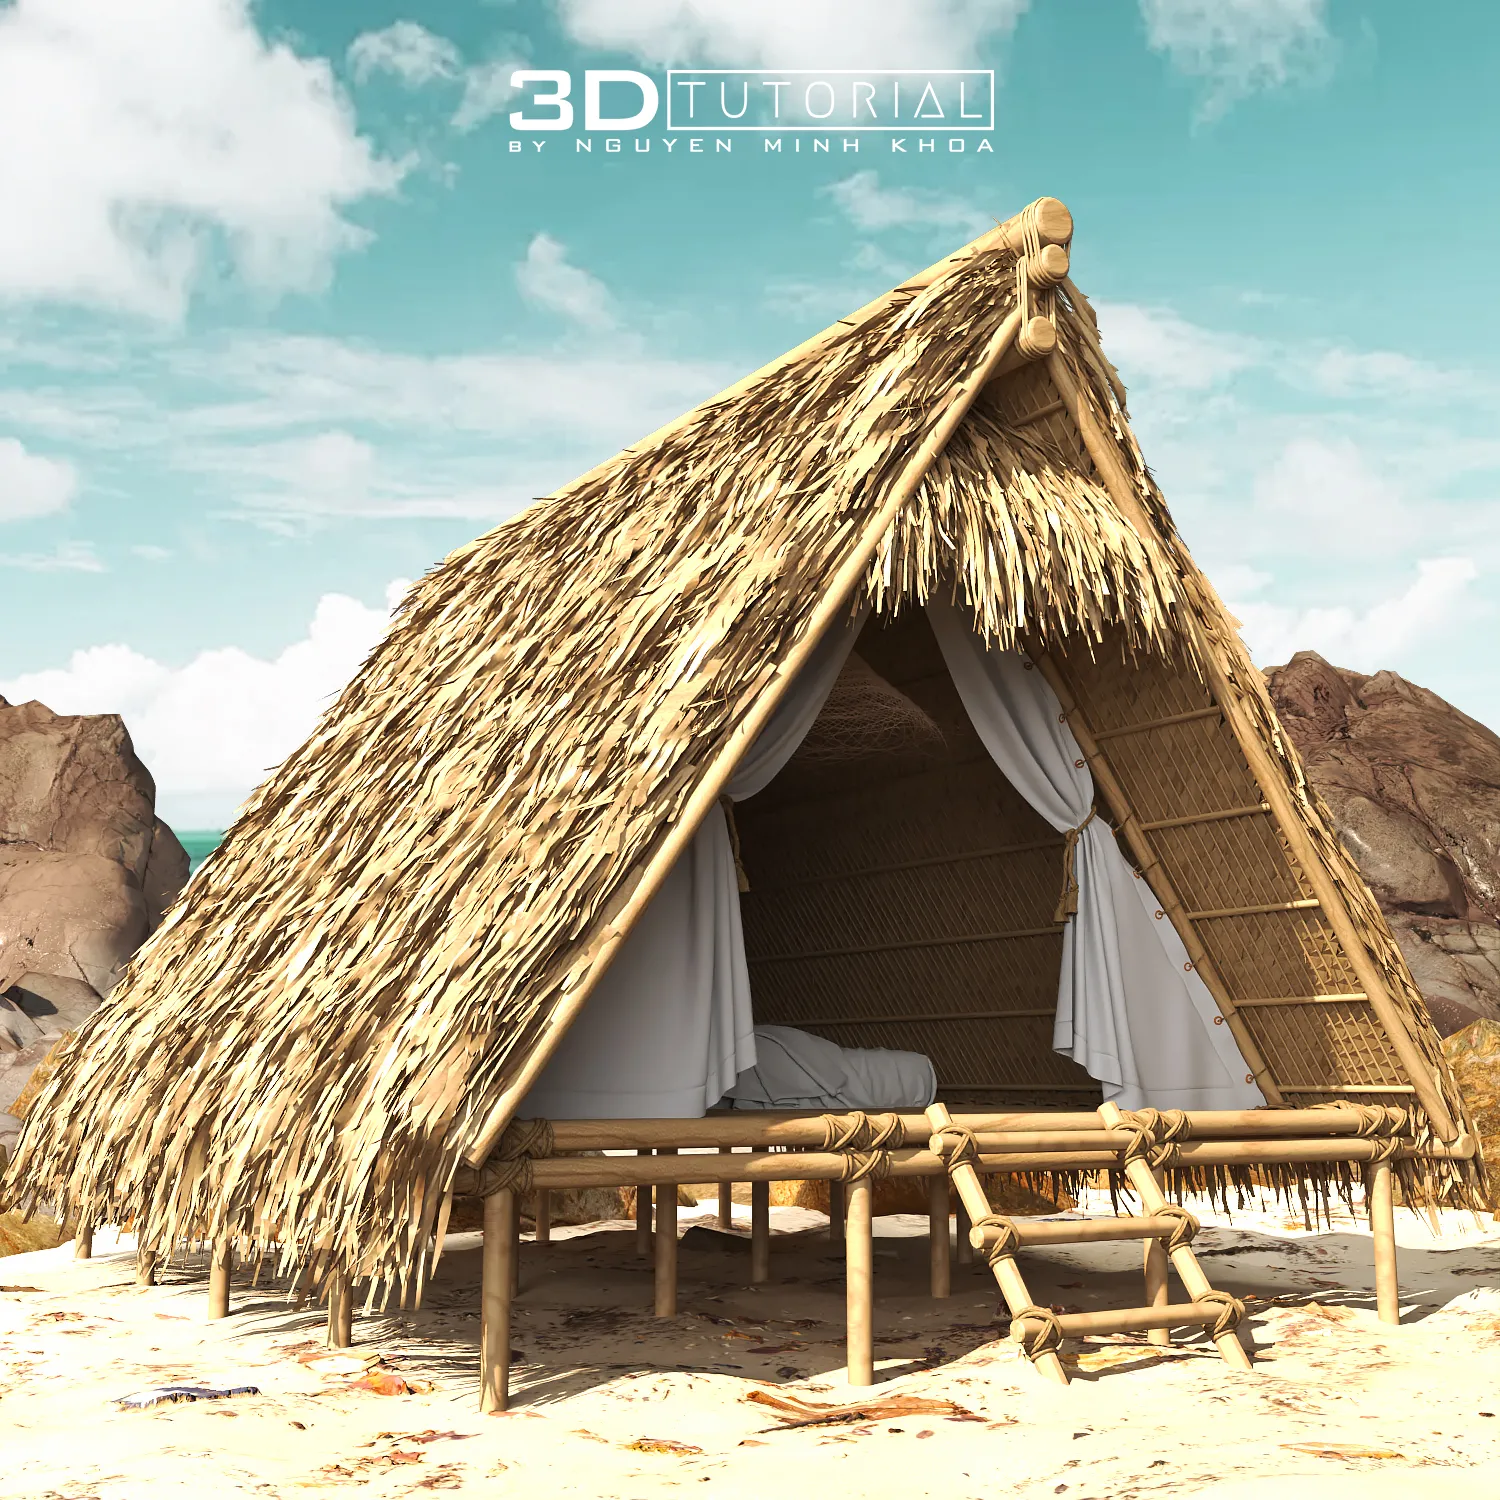 FURNITURE 3D MODELS – Beach cottages 3d Tutorial by NguyenMinhKhoa